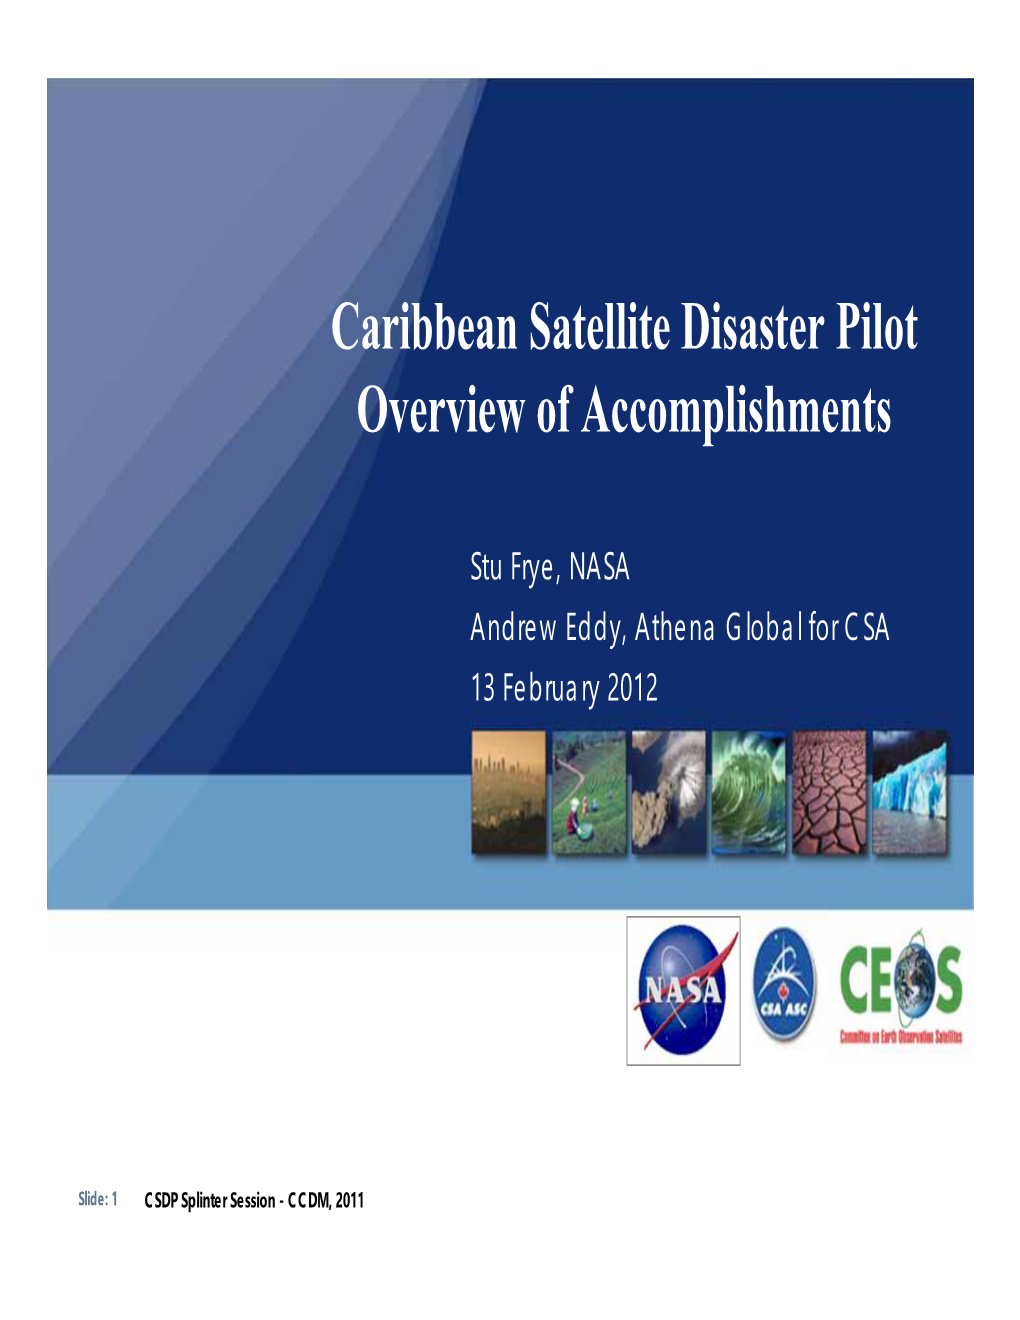 Caribbean Satellite Disaster Pilot Overview of Accomplishments